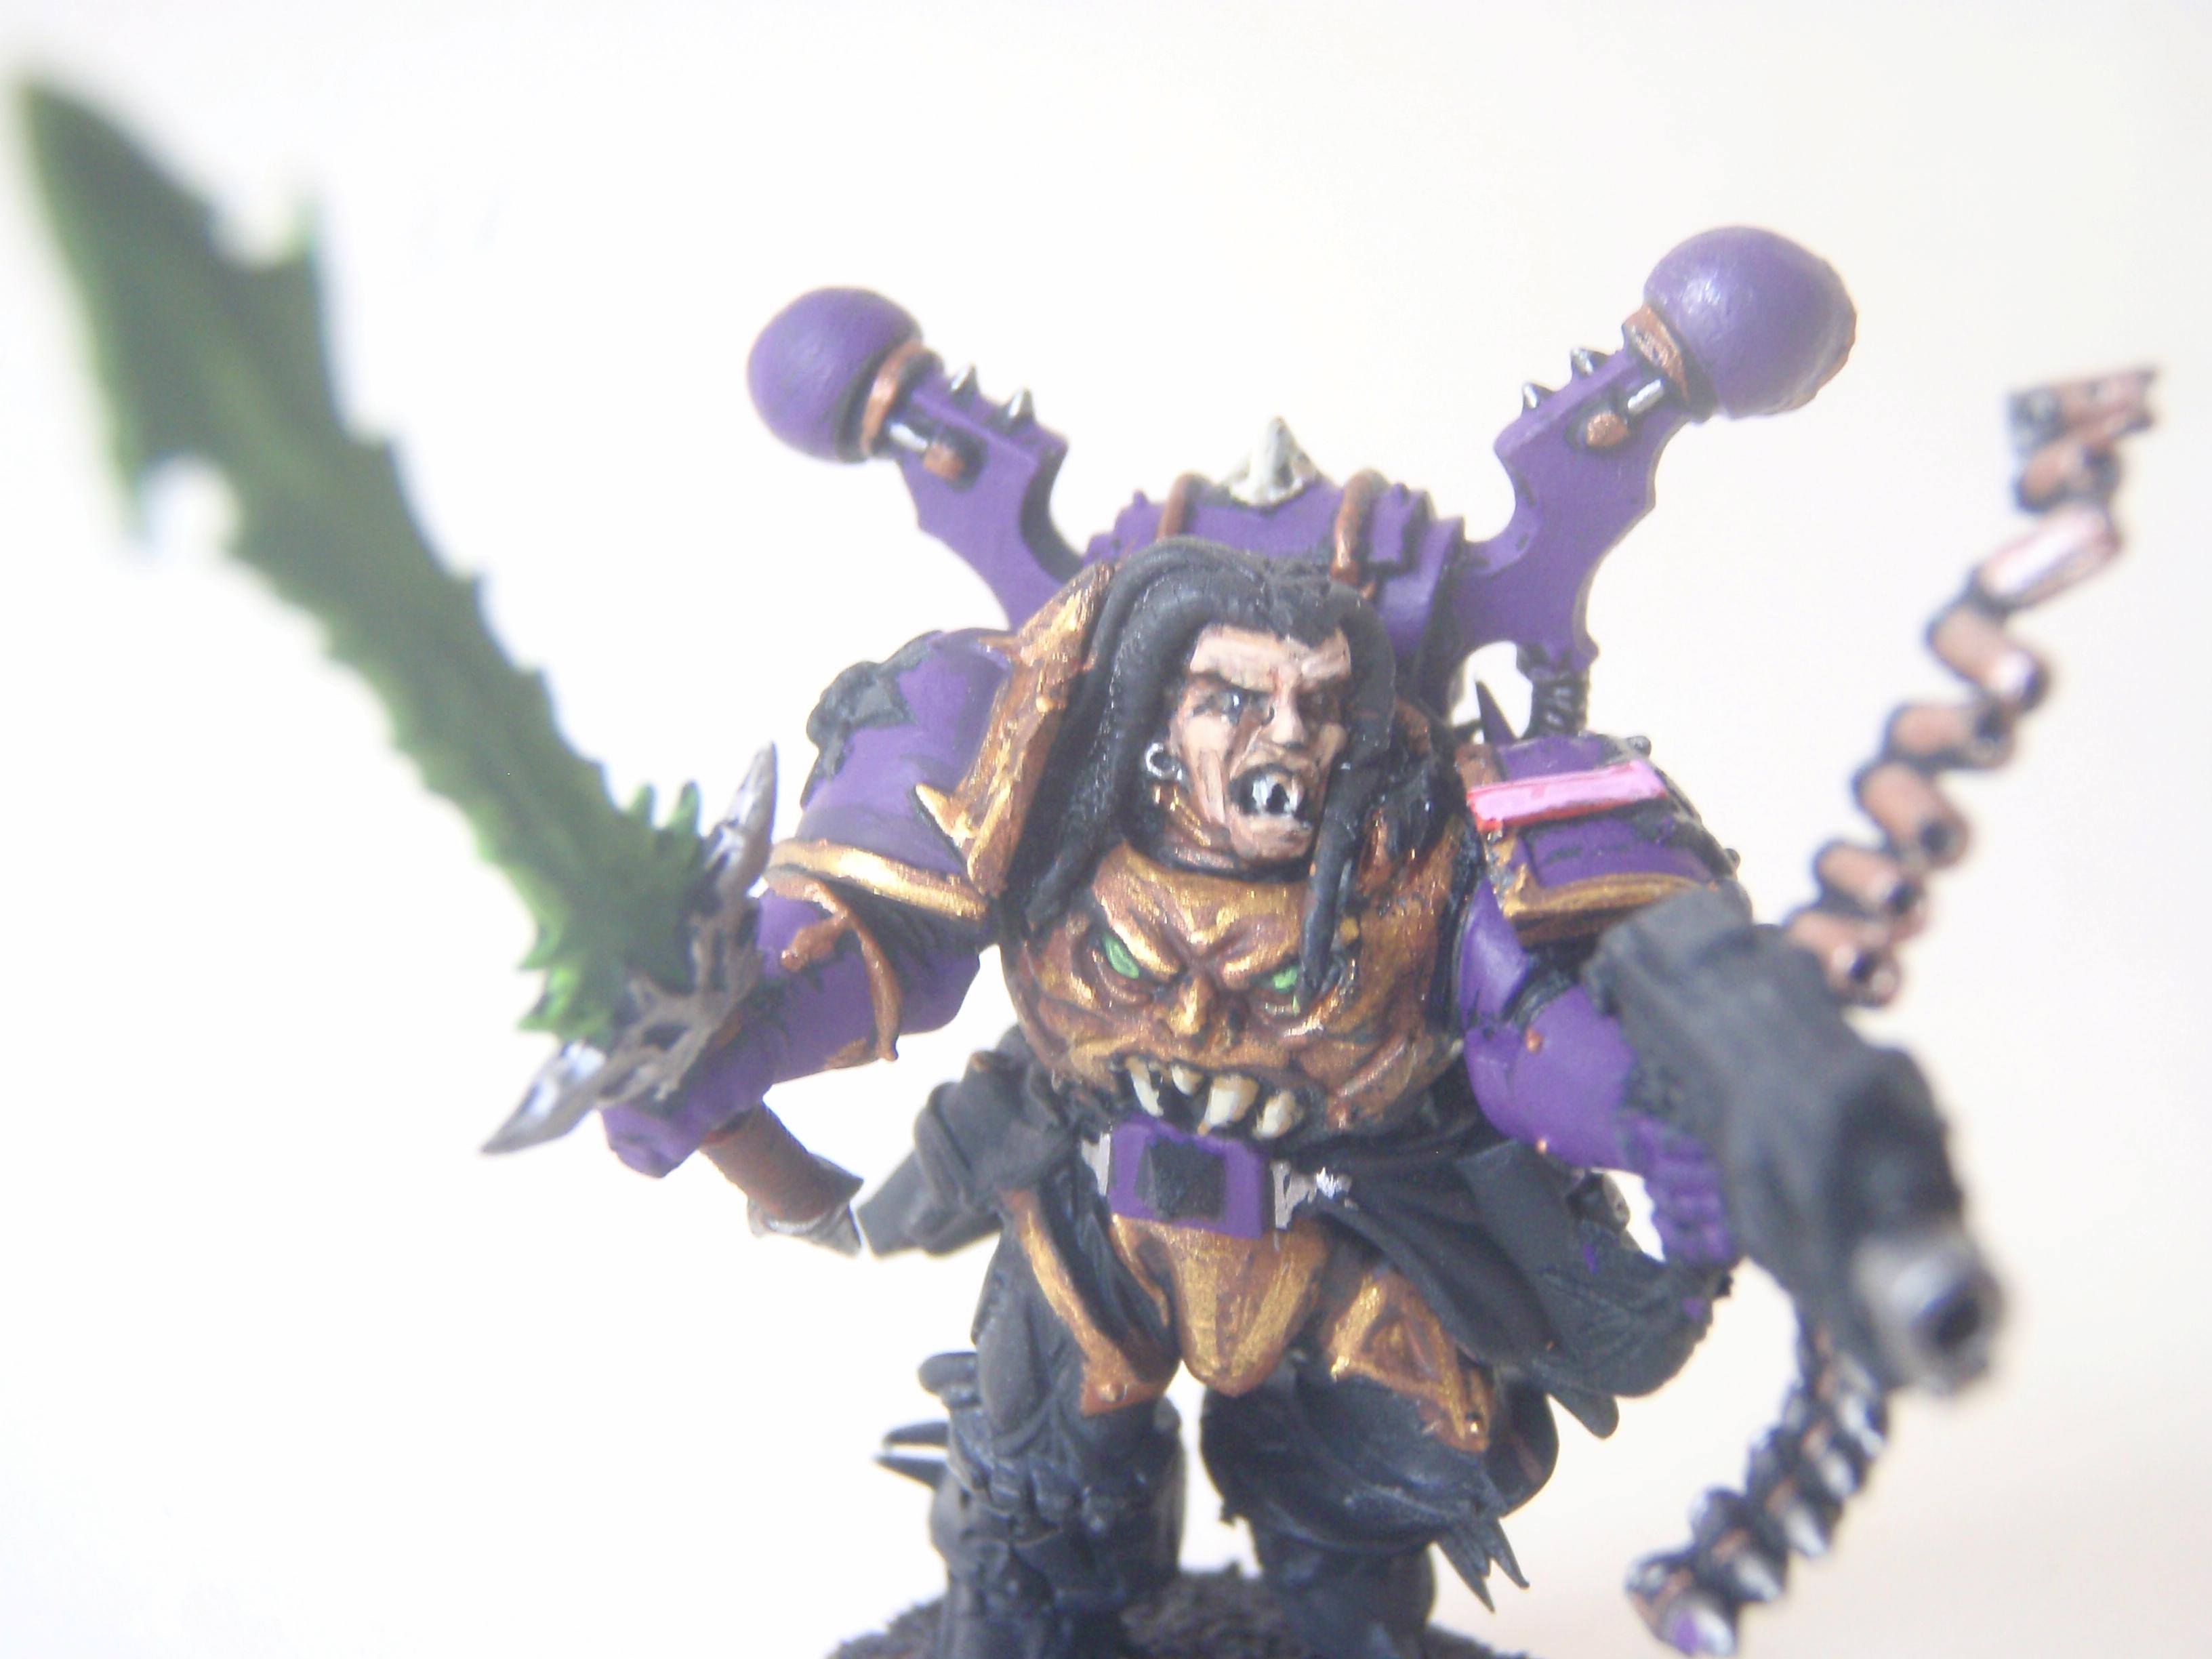 Wip Chaos Lord!